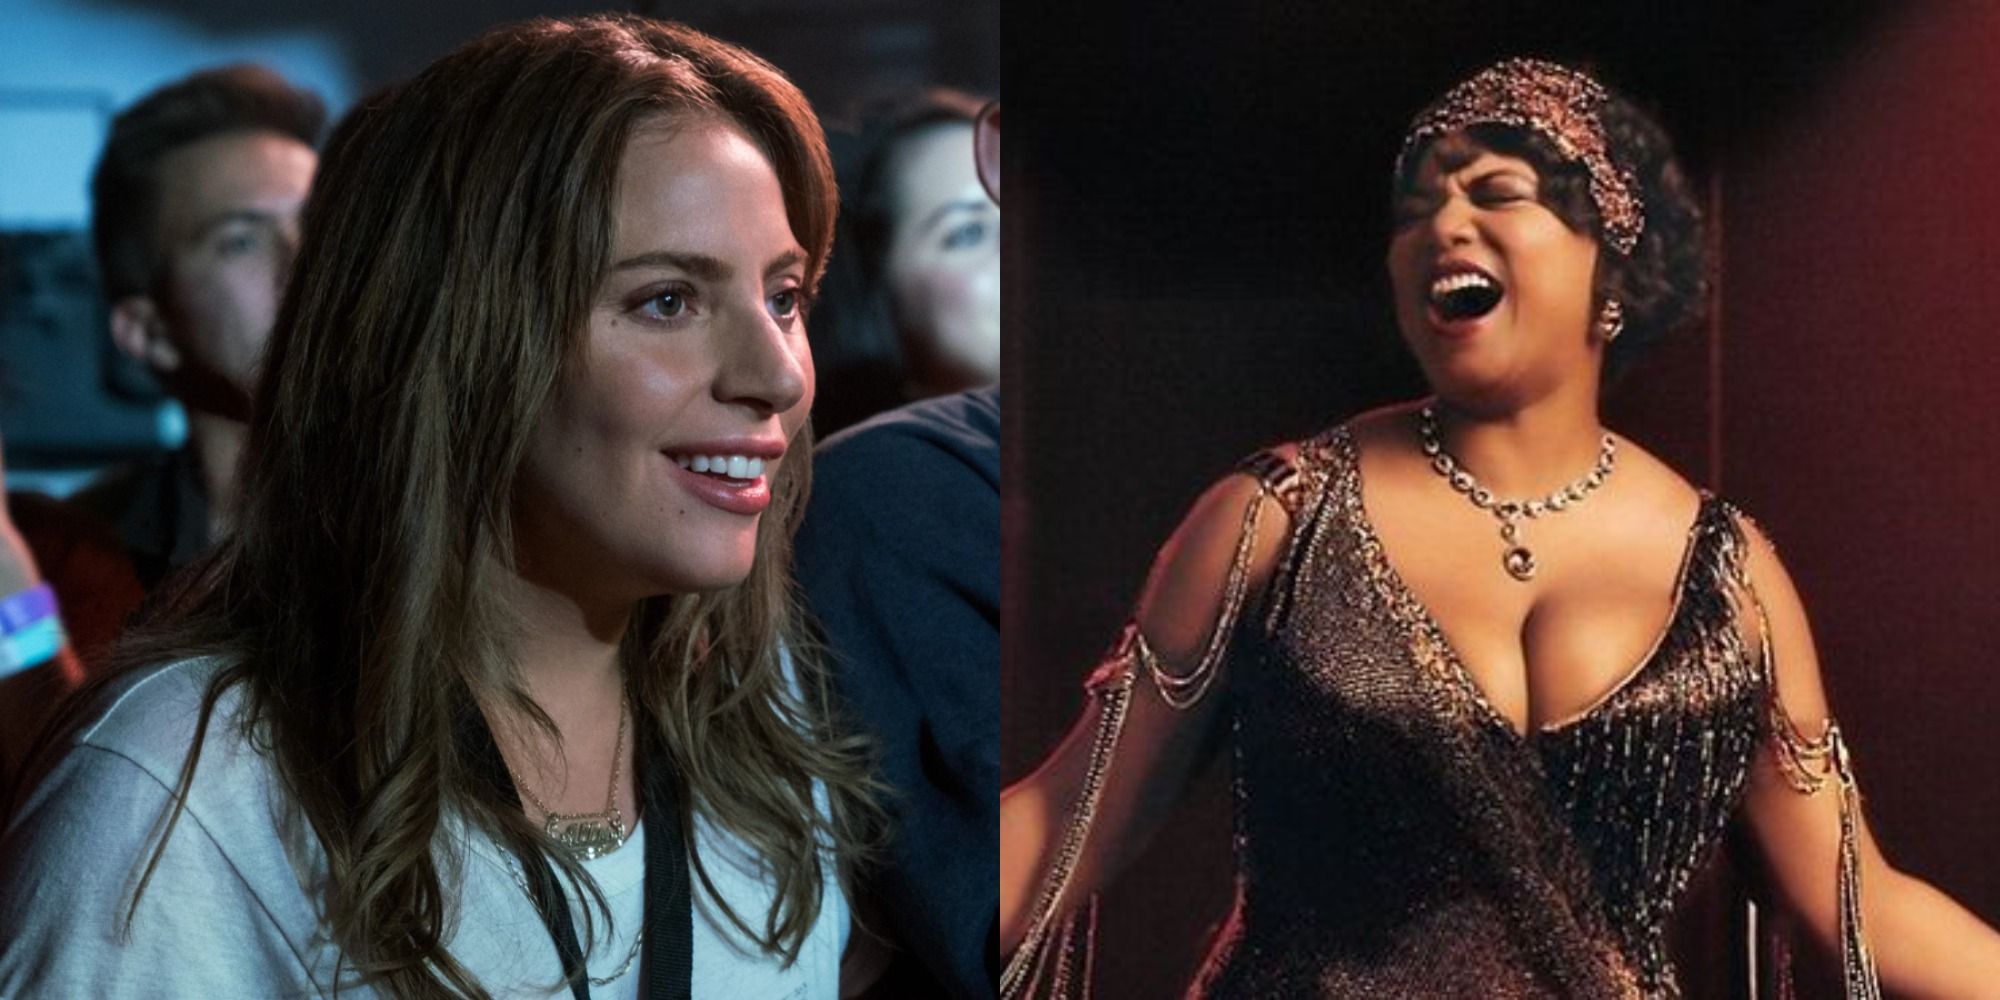 Split image showing Allie in A Star is Born and Mama Morton in Chicago